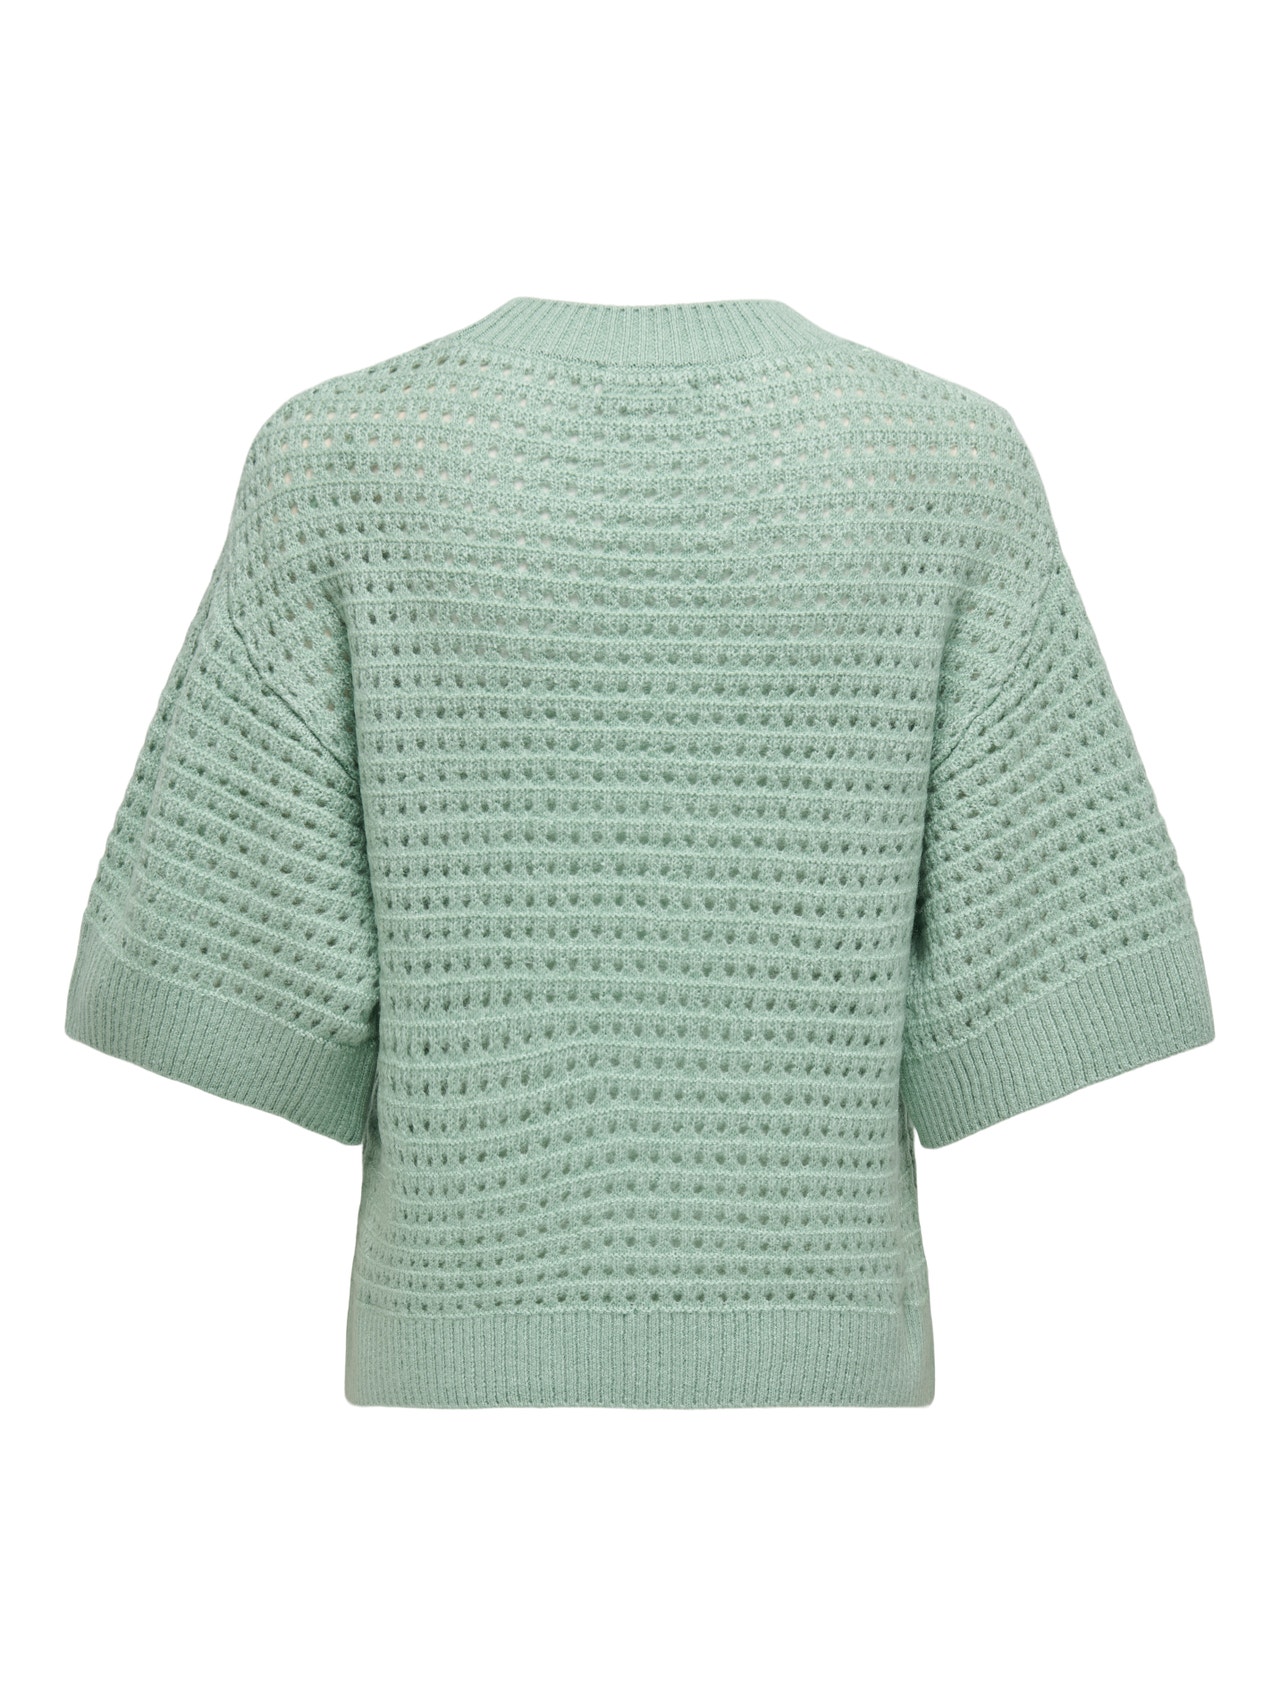 ONLY O-neck knitted top -Frosty Green - 15342482